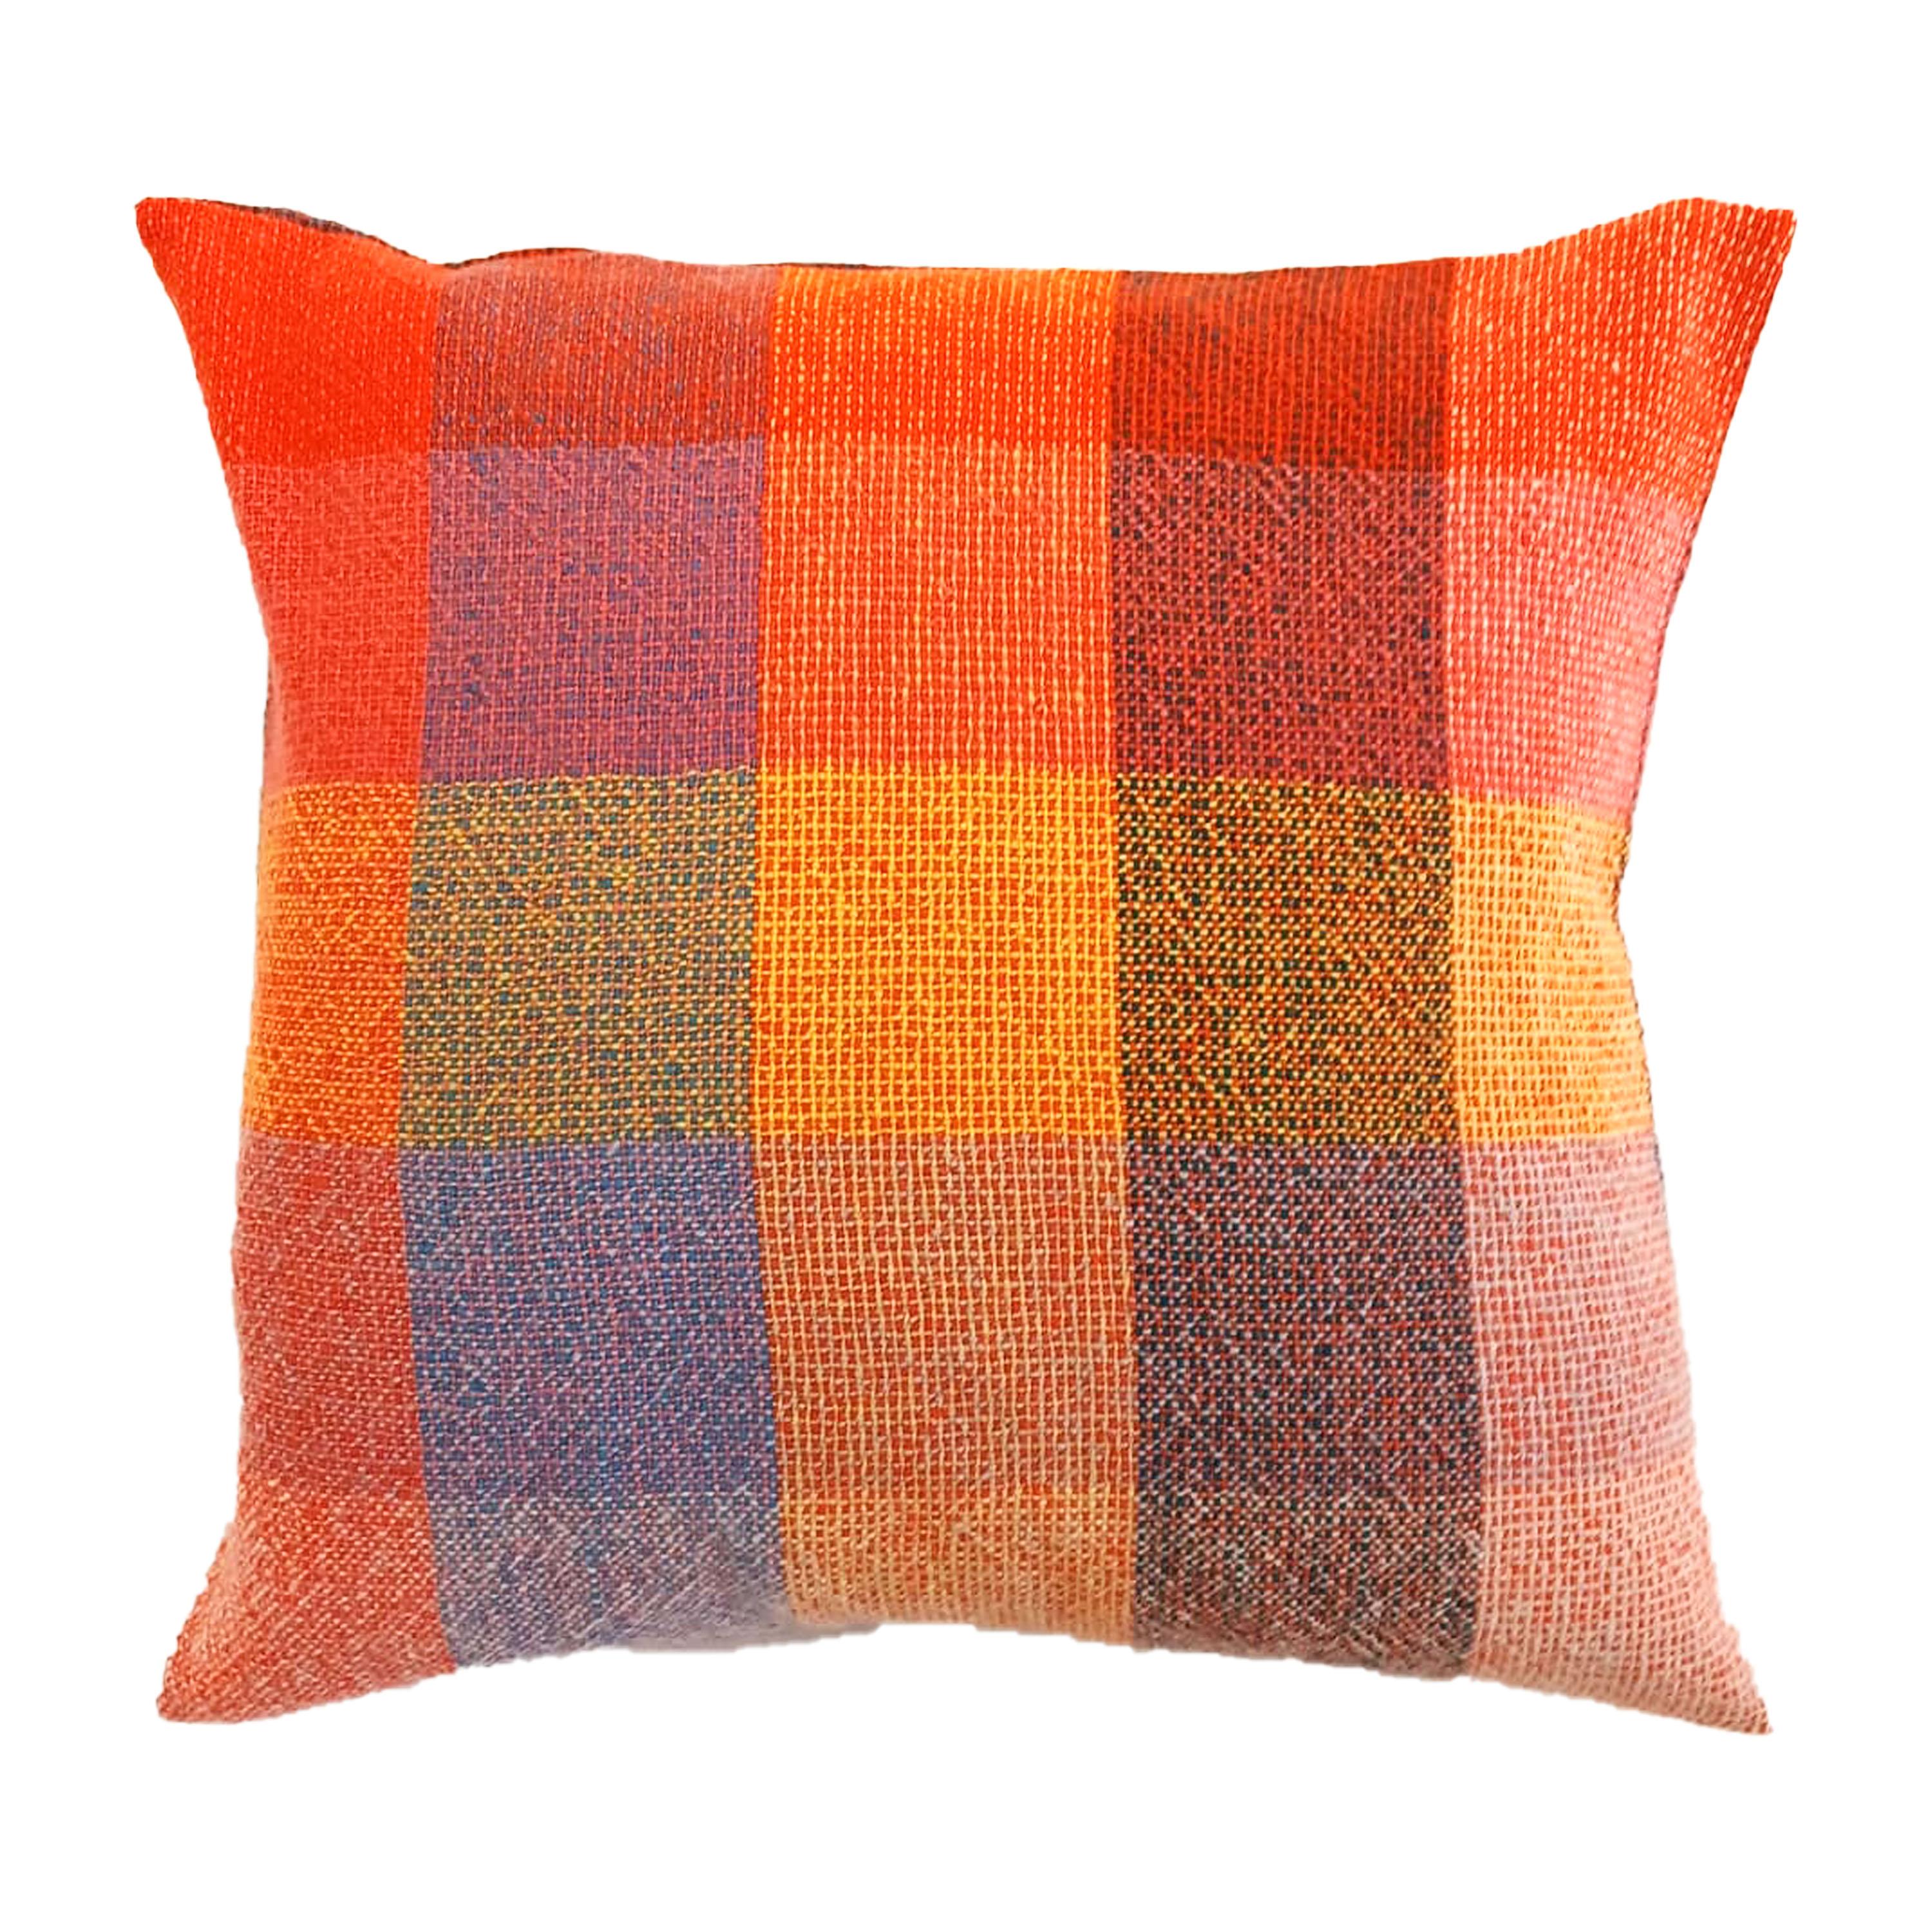 Hand-woven multicolor cushion, made of 100% eco-friendly French merino wool. Designed by the international designer Cristian Zuzunga. 
The cushion feature two special finishes: a fringed finish and one with intertwined threads. The wool production